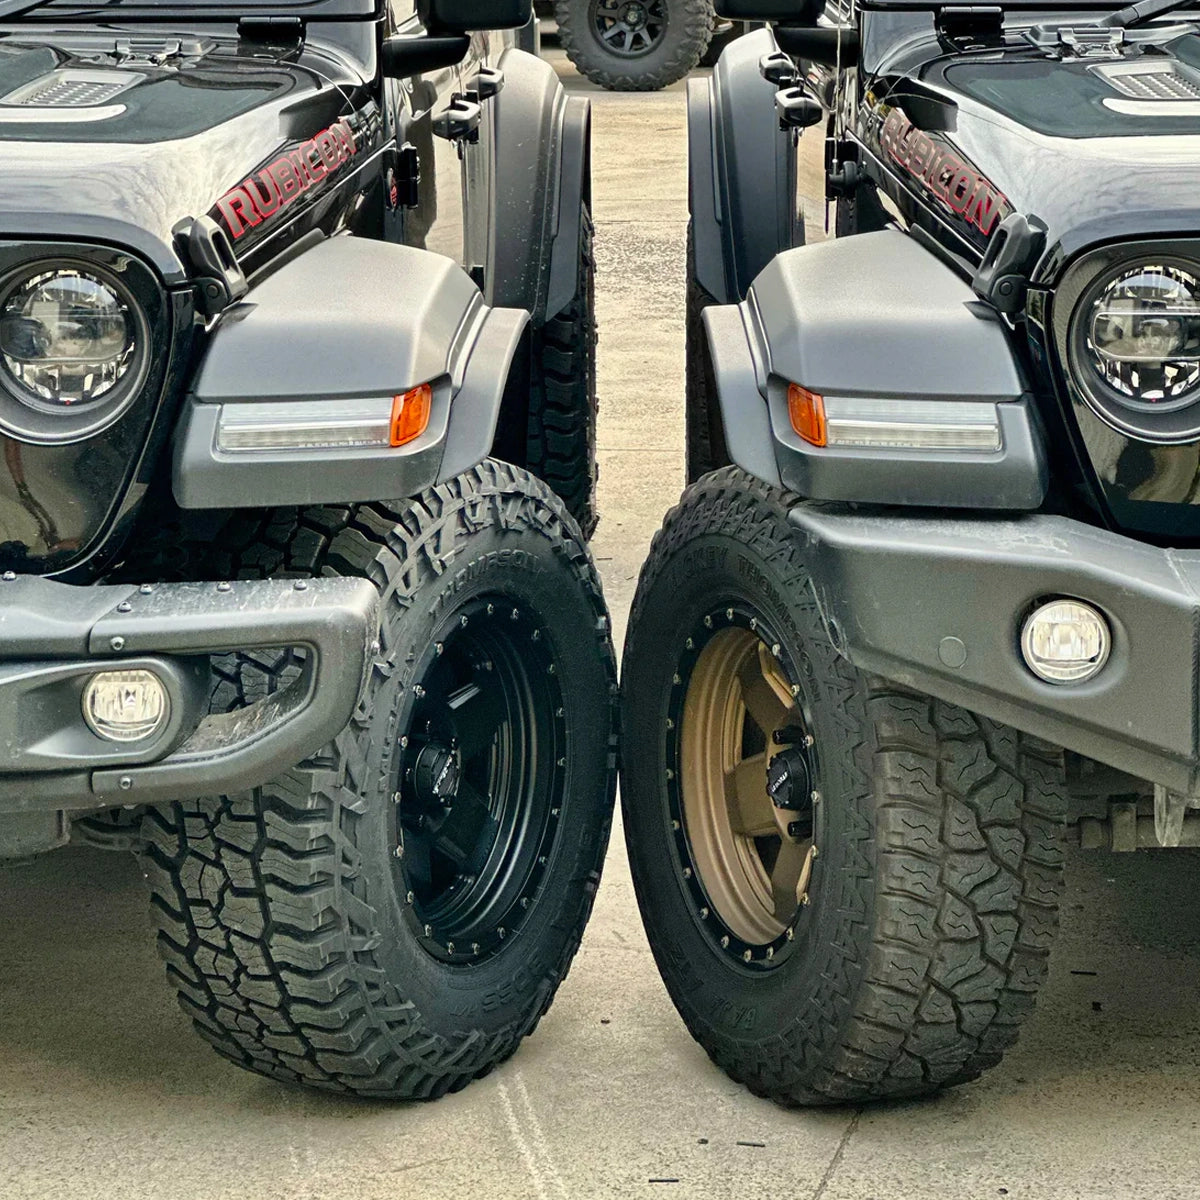 DBOR - 2" Fender Extensions for JT Gladiator (AUS/EU SPEC) and/or Max Tow Fender pack US market